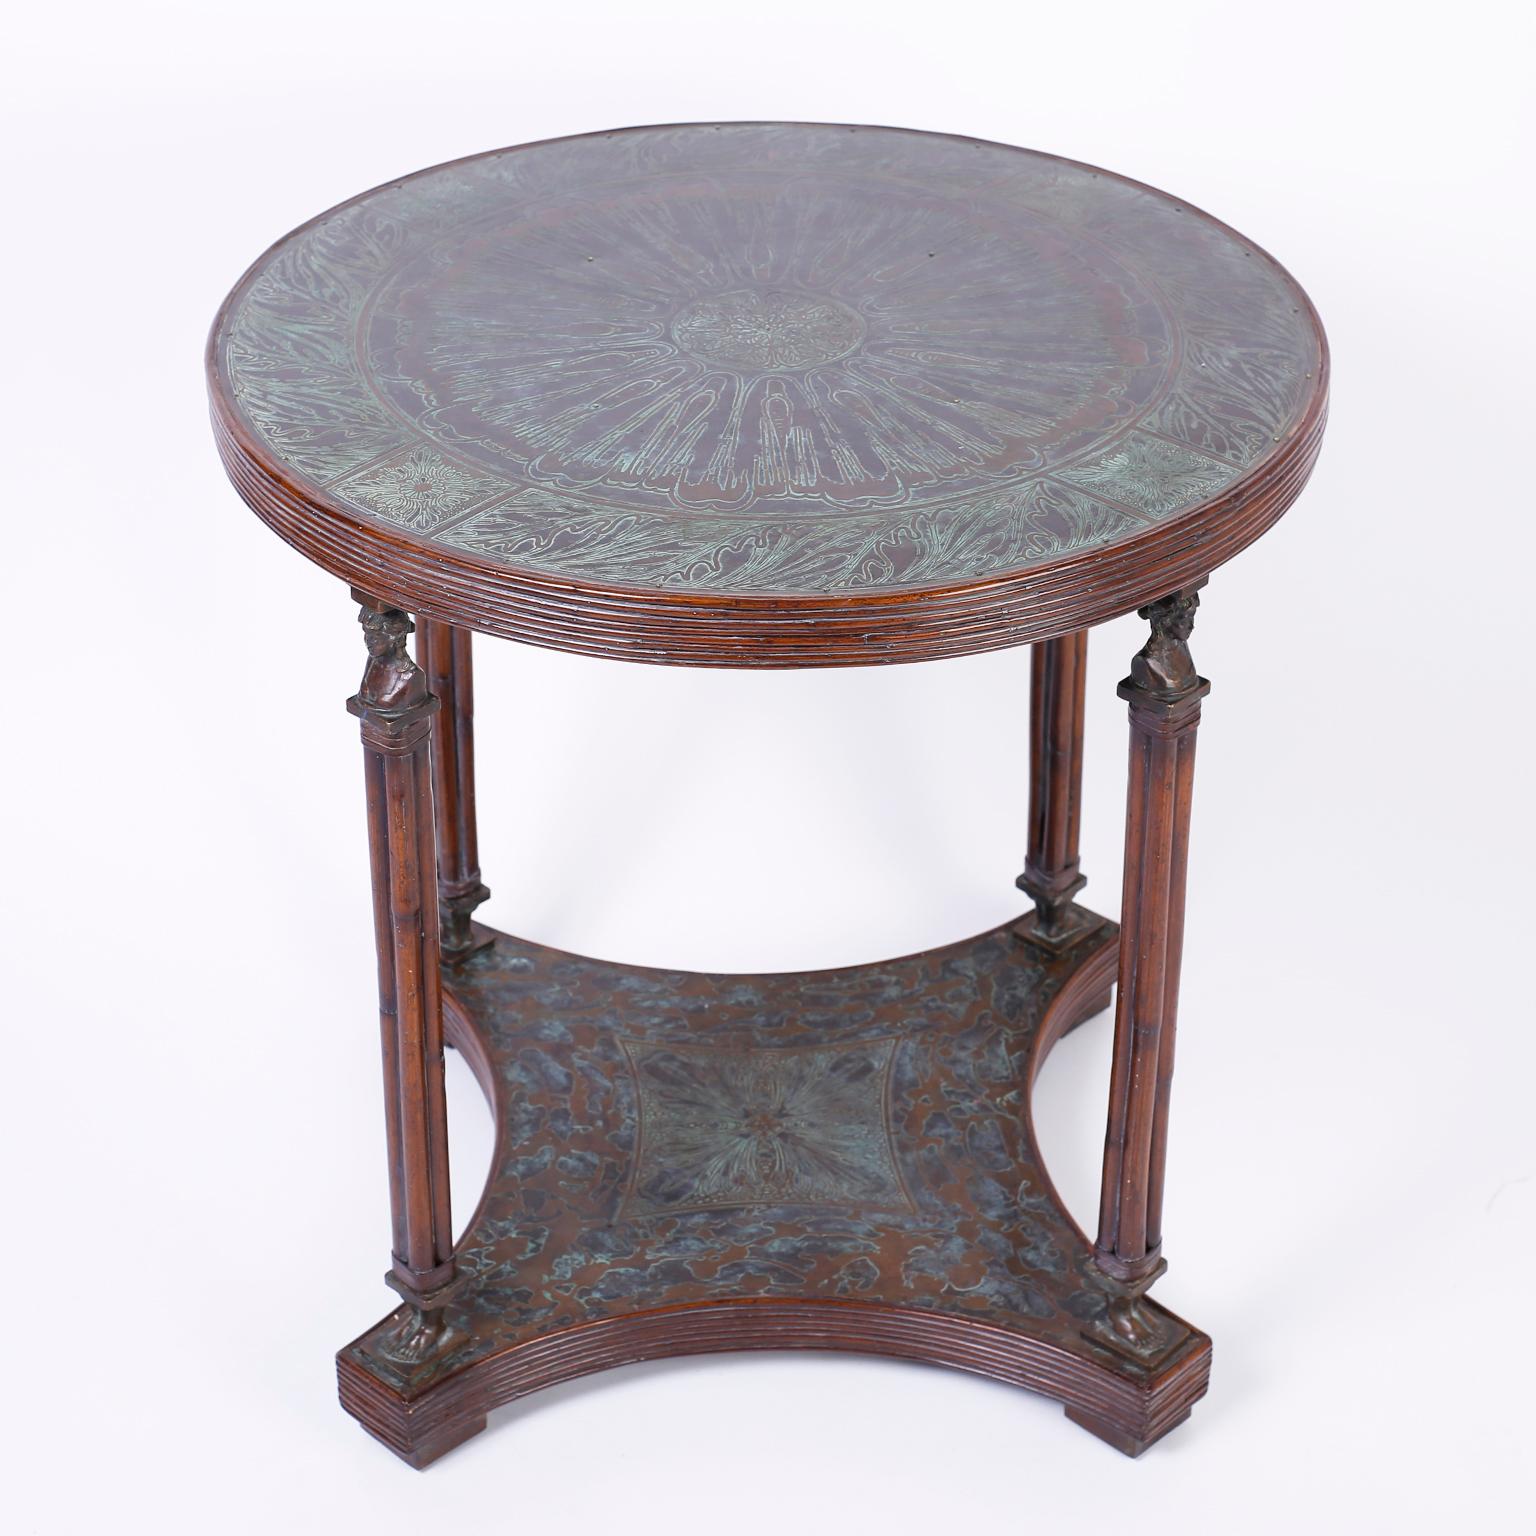 Midcentury center or occasional table with a round top clad in bronze over wood and decorated with three different patina techniques on hammered floral designs. The four columns have classical cast bronze figural heads and feet over a hammered